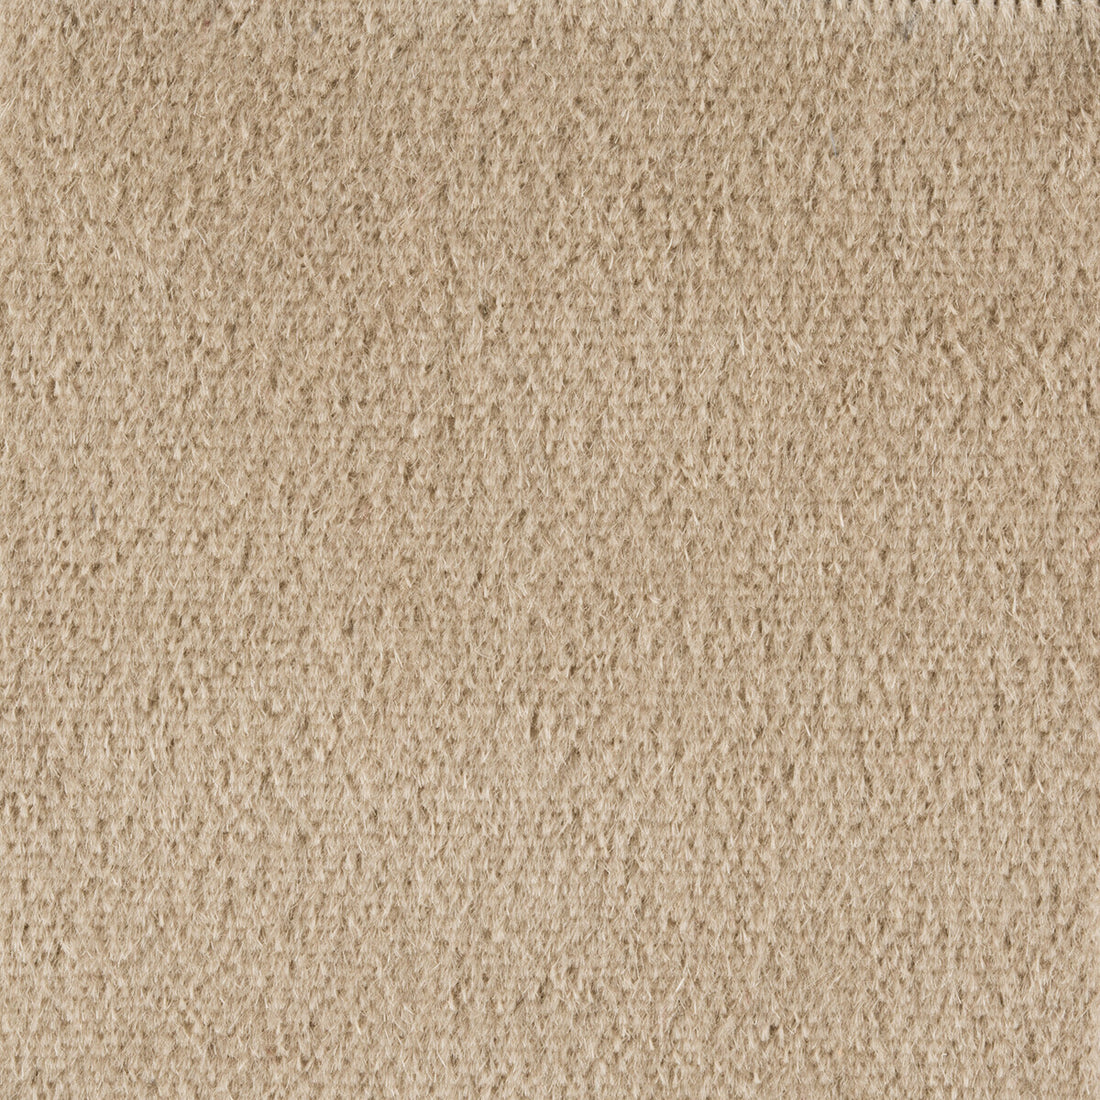 Autun Mohair Velvet fabric in cobblestone color - pattern BR-89778.931.0 - by Brunschwig &amp; Fils